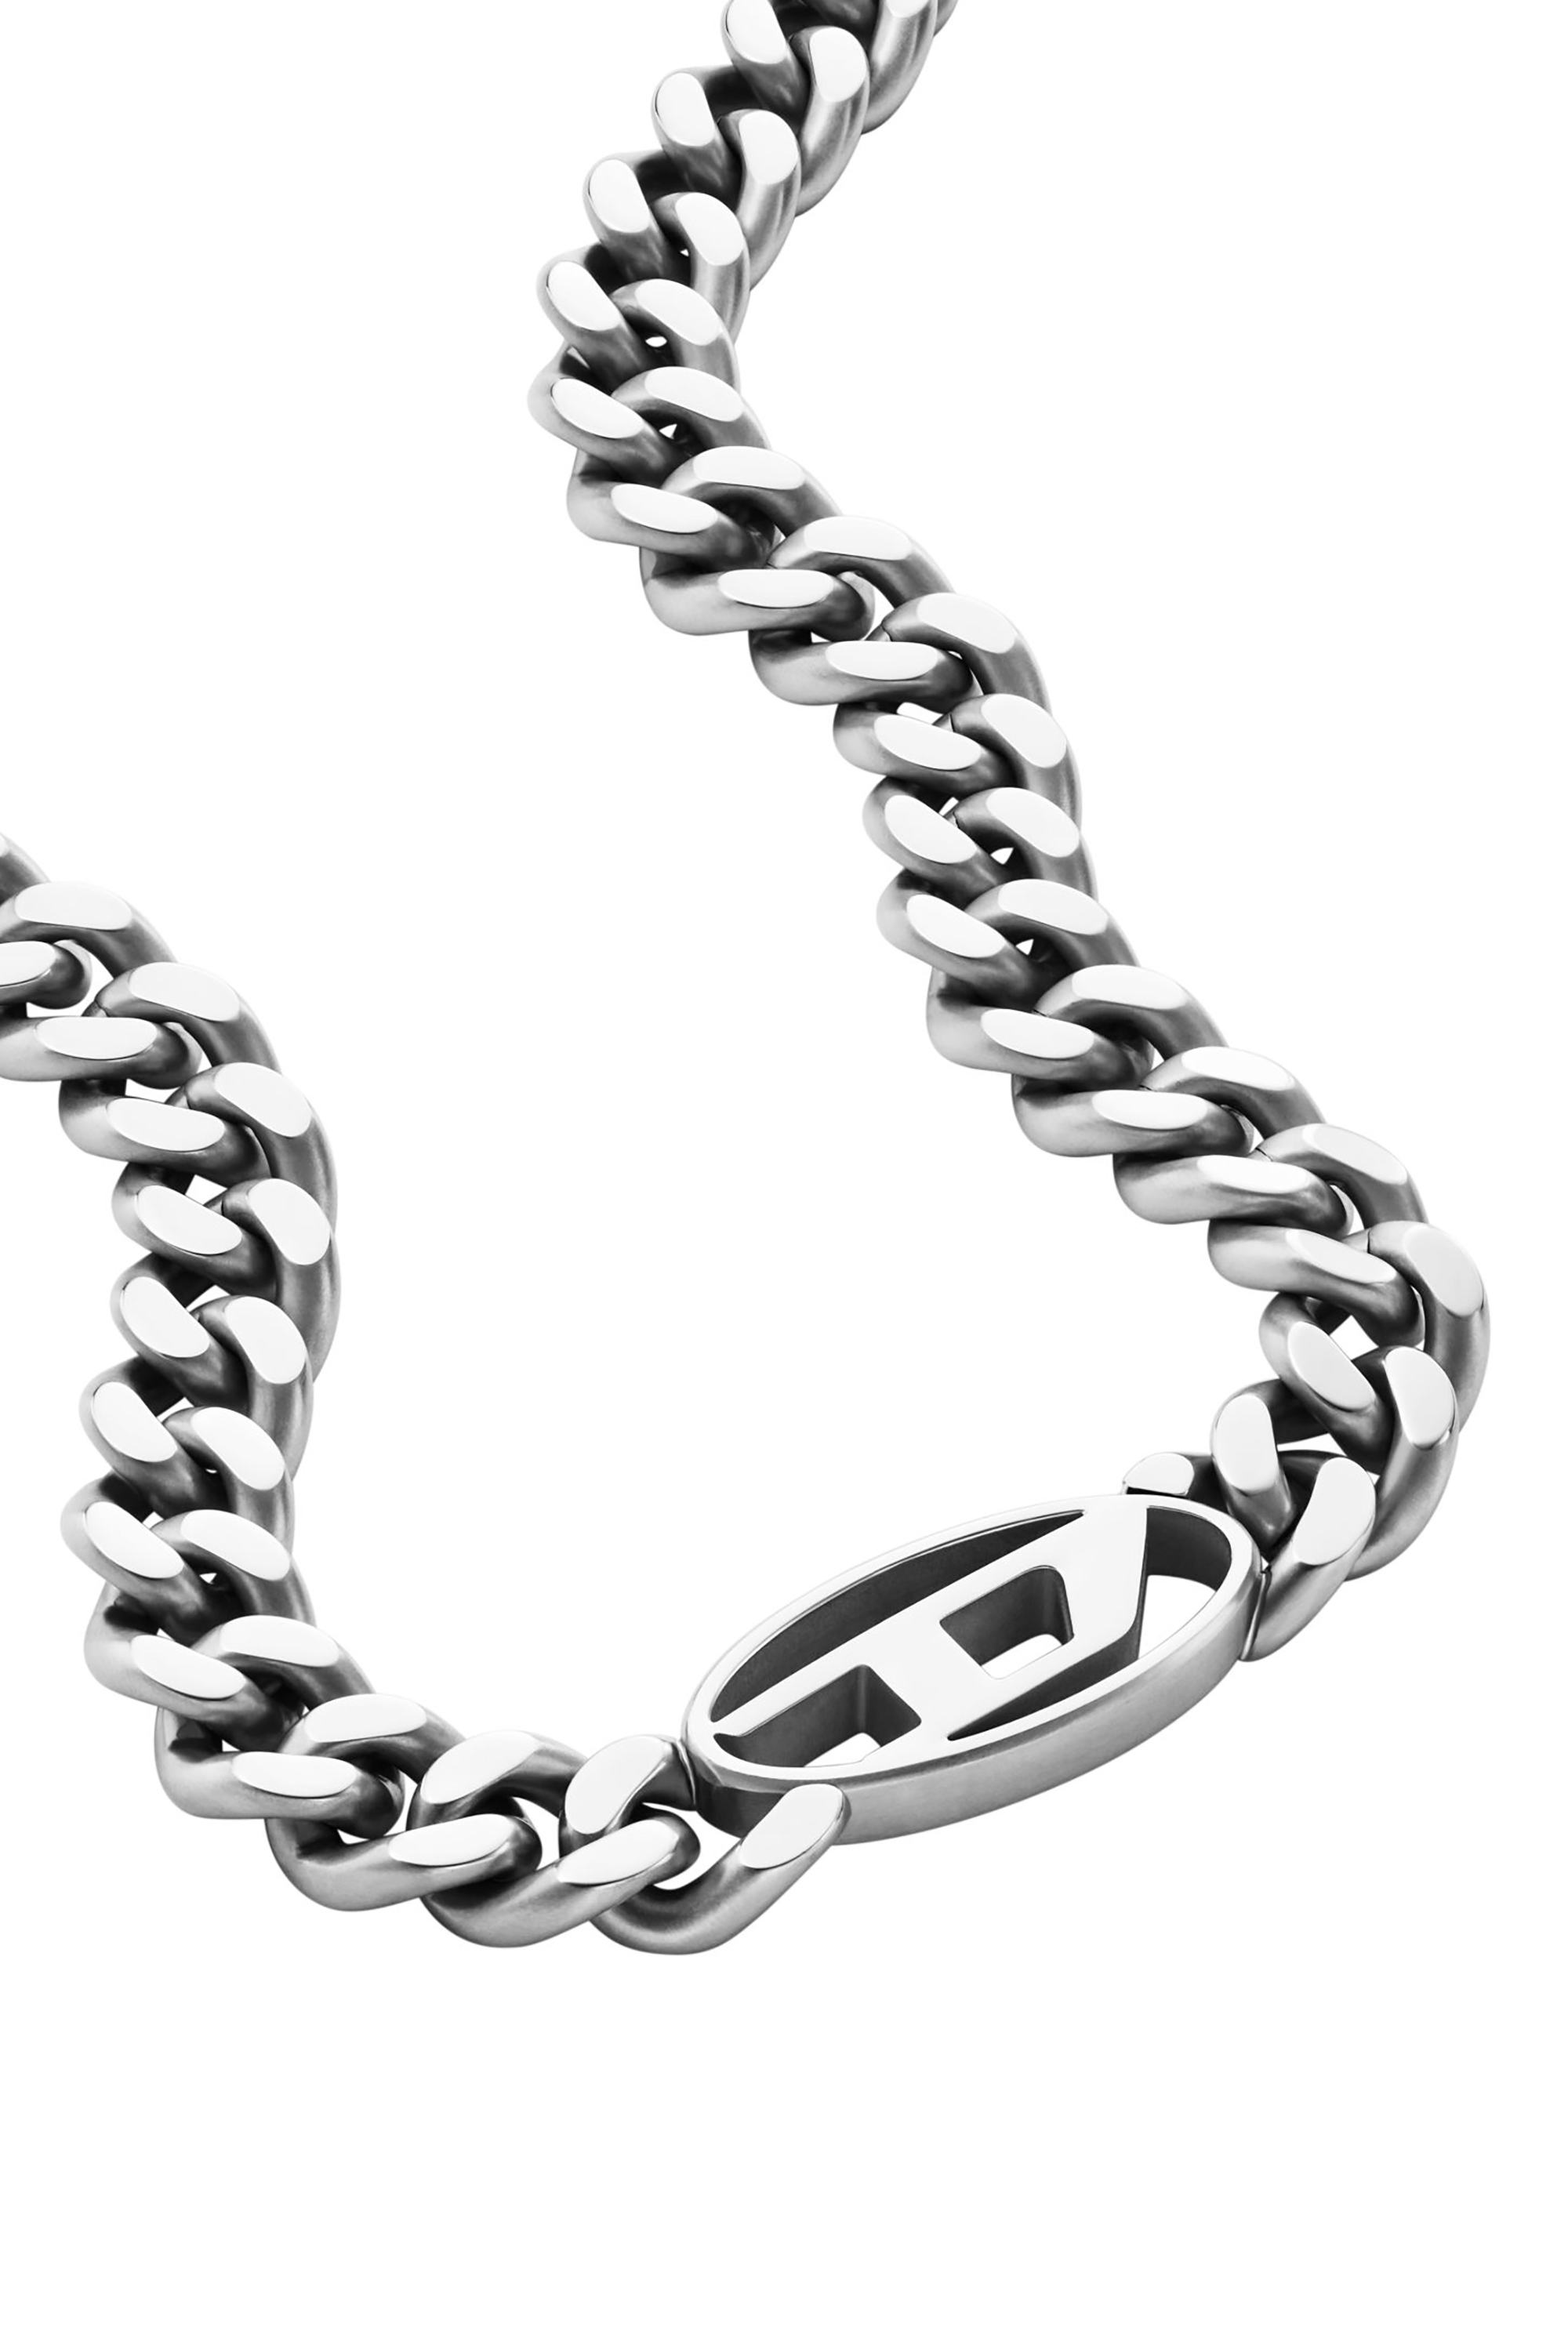 Men's Necklaces: Stainless Steel, Chain